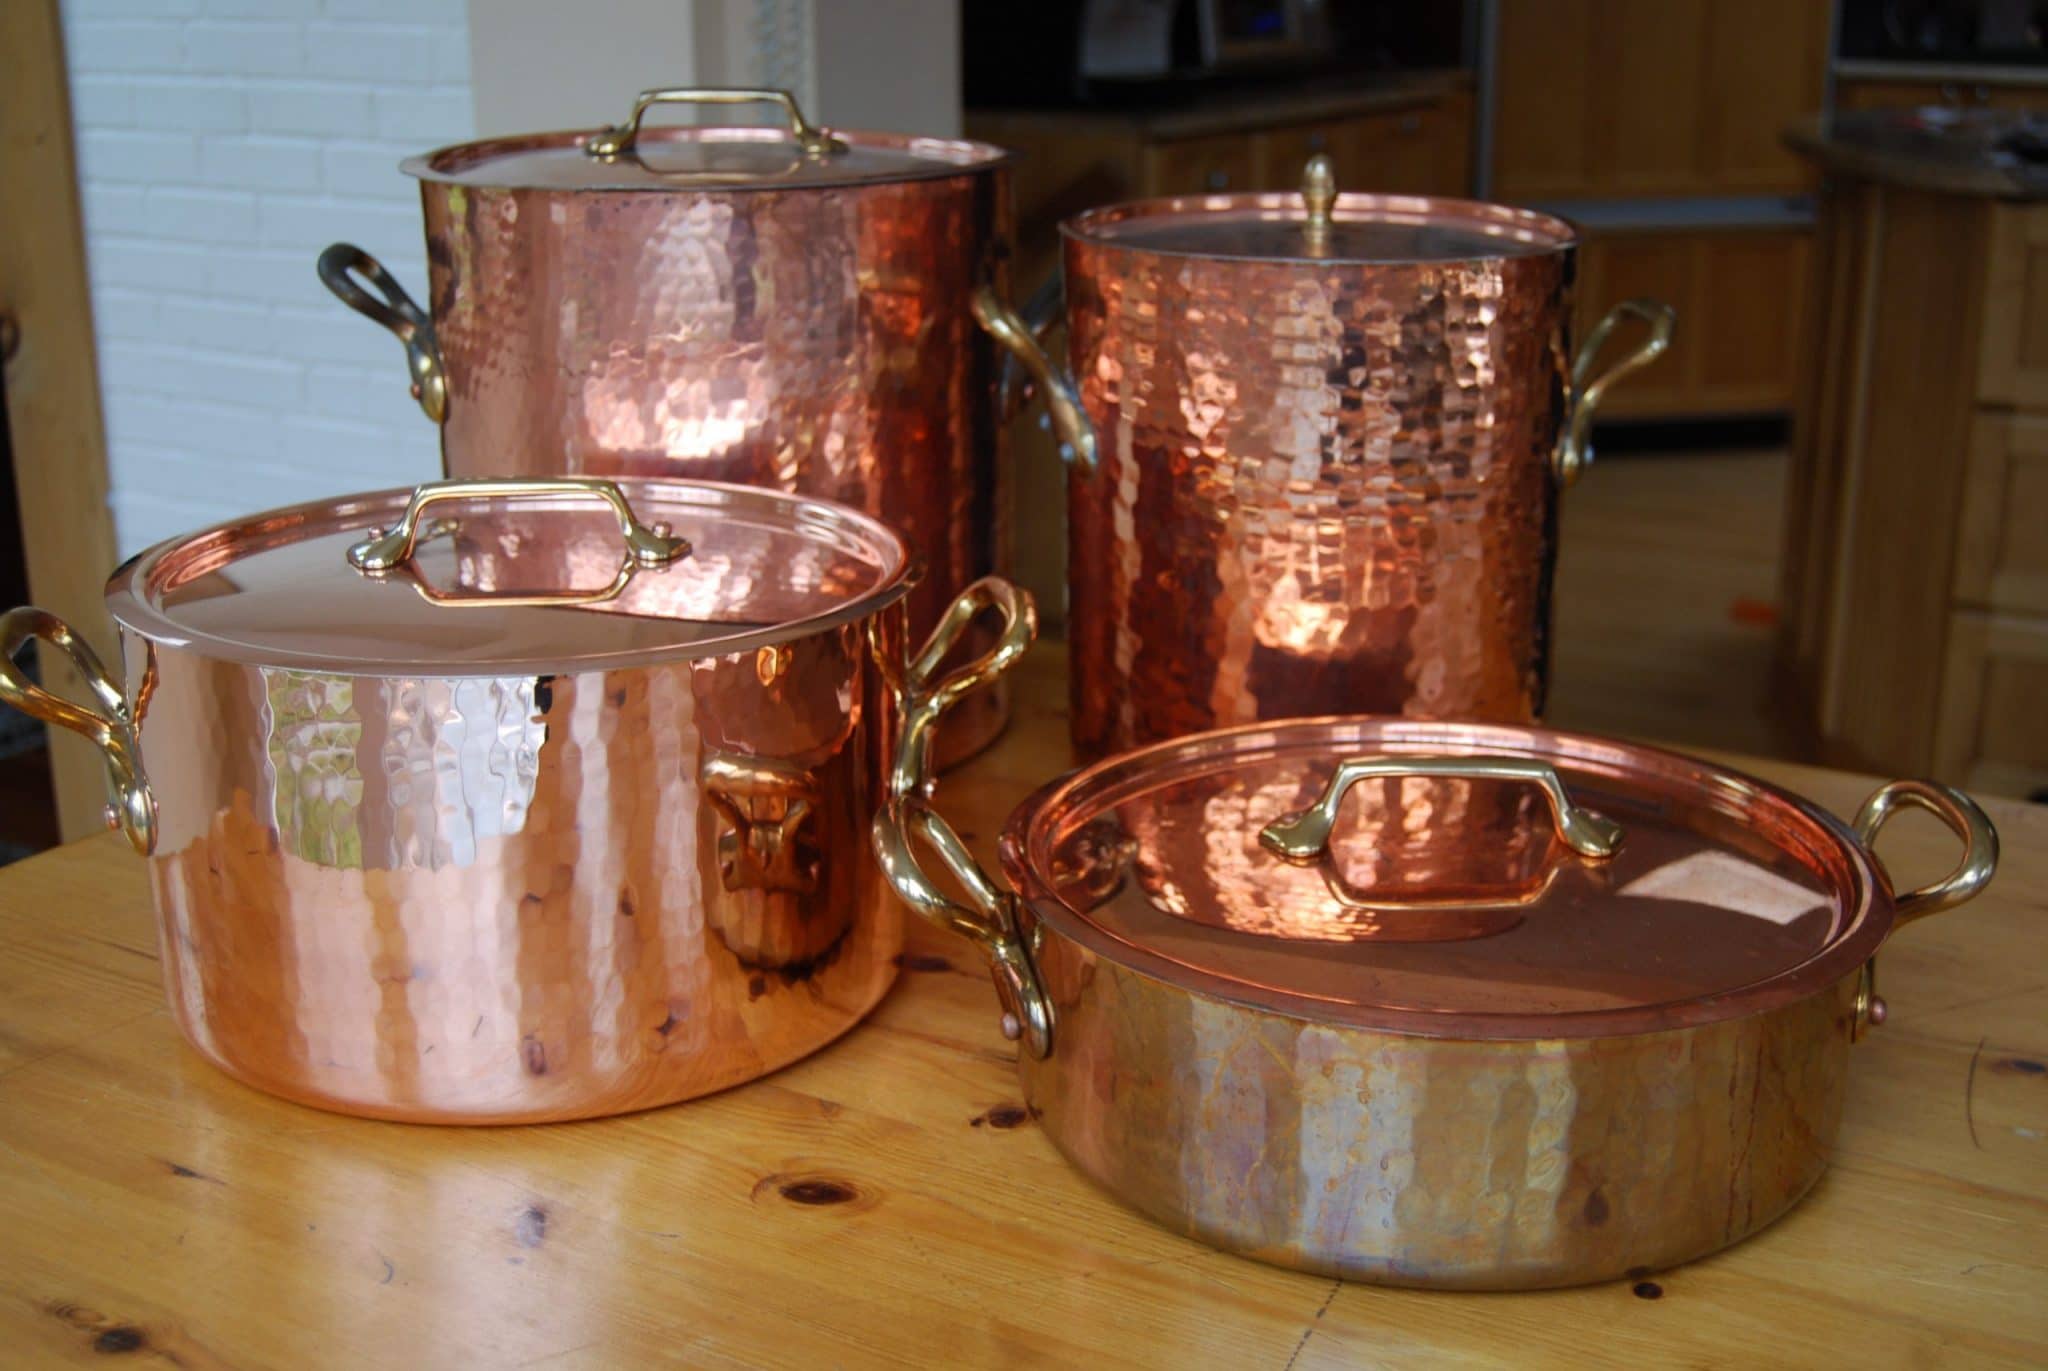 https://www.vintagefrenchcopper.com/wp-content/uploads/2018/12/rondeau-stewpot-soup-pot-stockpot-how-to-tell-the-difference-4.jpg